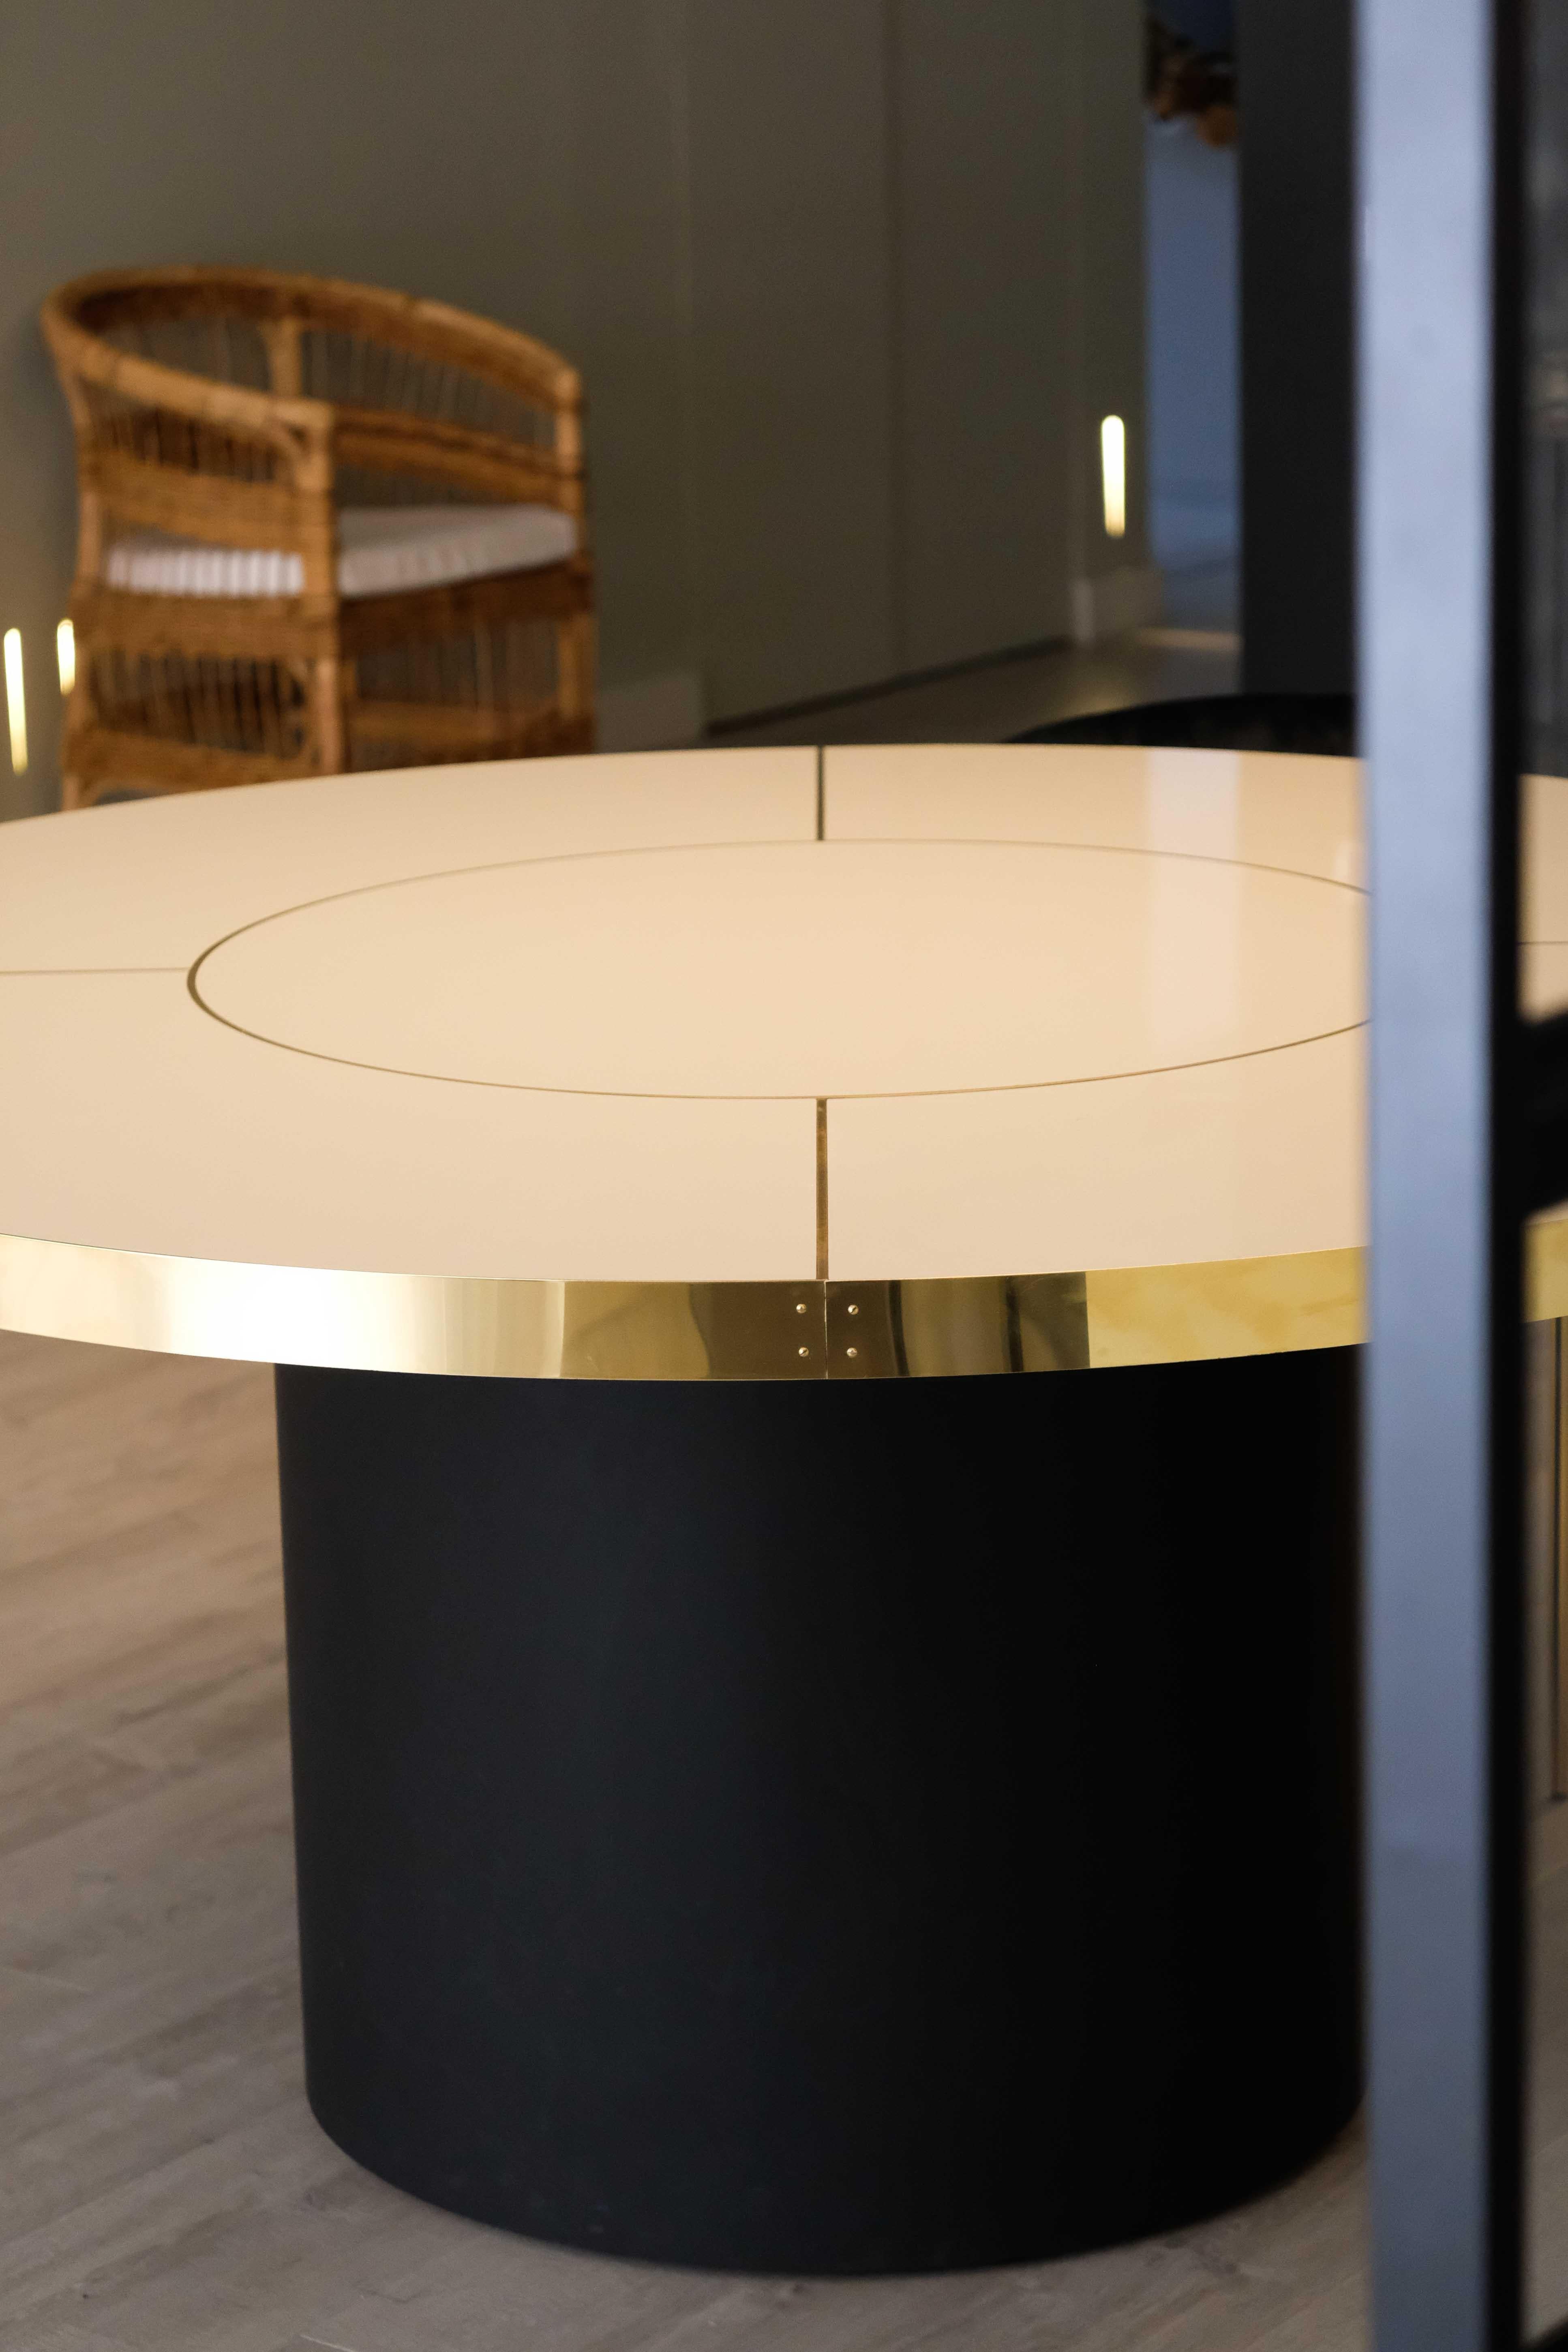 Retro Design Round Dining Table Palm Springs Style High Gloss Laminated&Brass L Neuf - En vente à Alcoy, Alicante